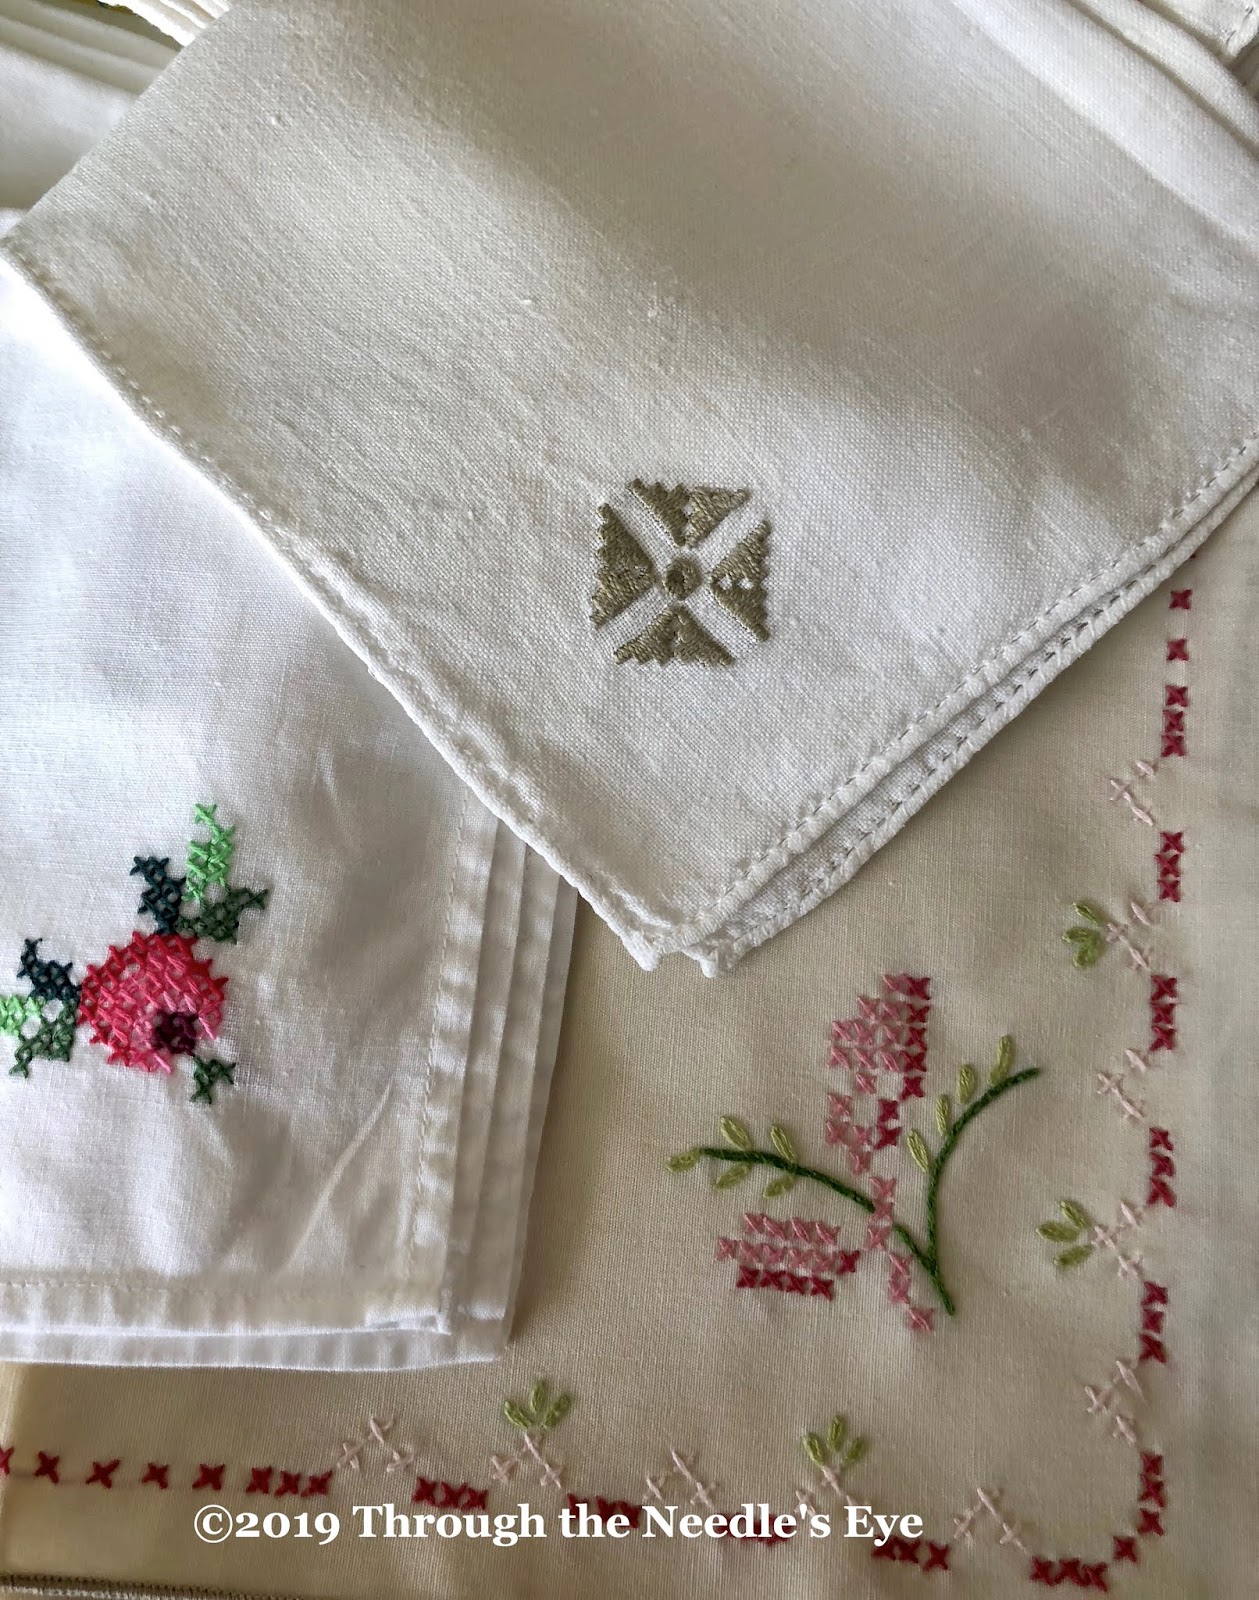 Telling Stories Through the Needle's Eye: A Vintage Pinafore, Tea, and ...